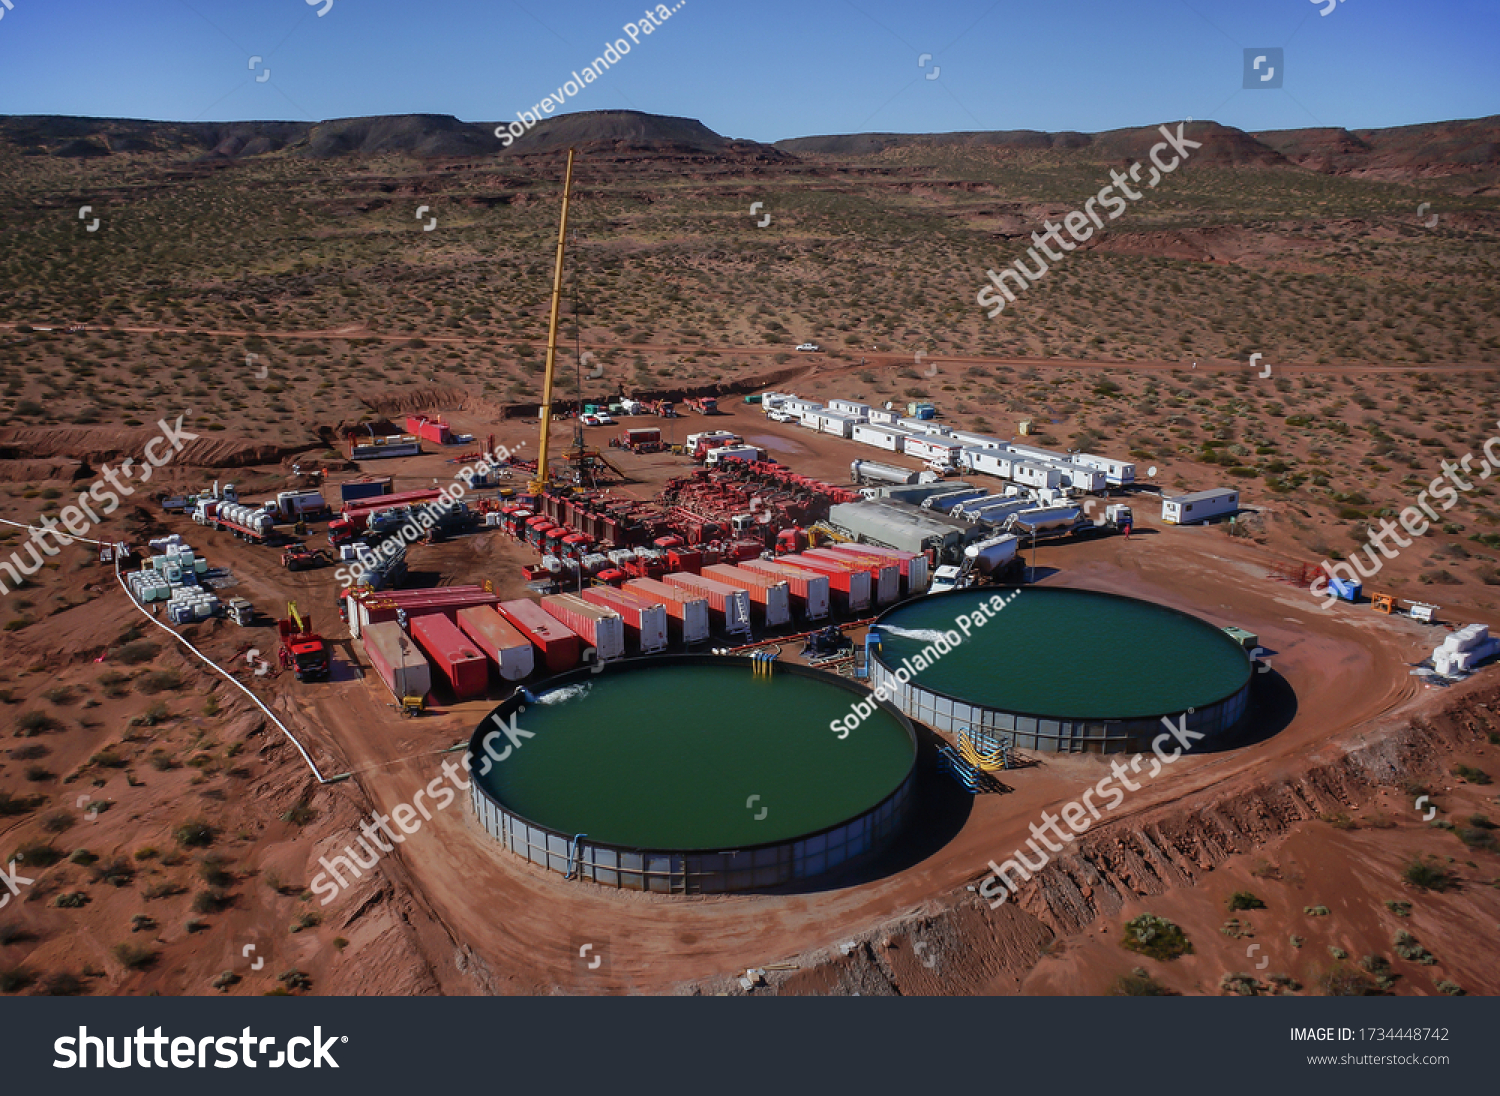 Vaca Muerta, Argentina, August 26, 2014: Extraction of unconventional oil. Battery of pumping trucks for hydraulic fracturing (Fracking). #1734448742